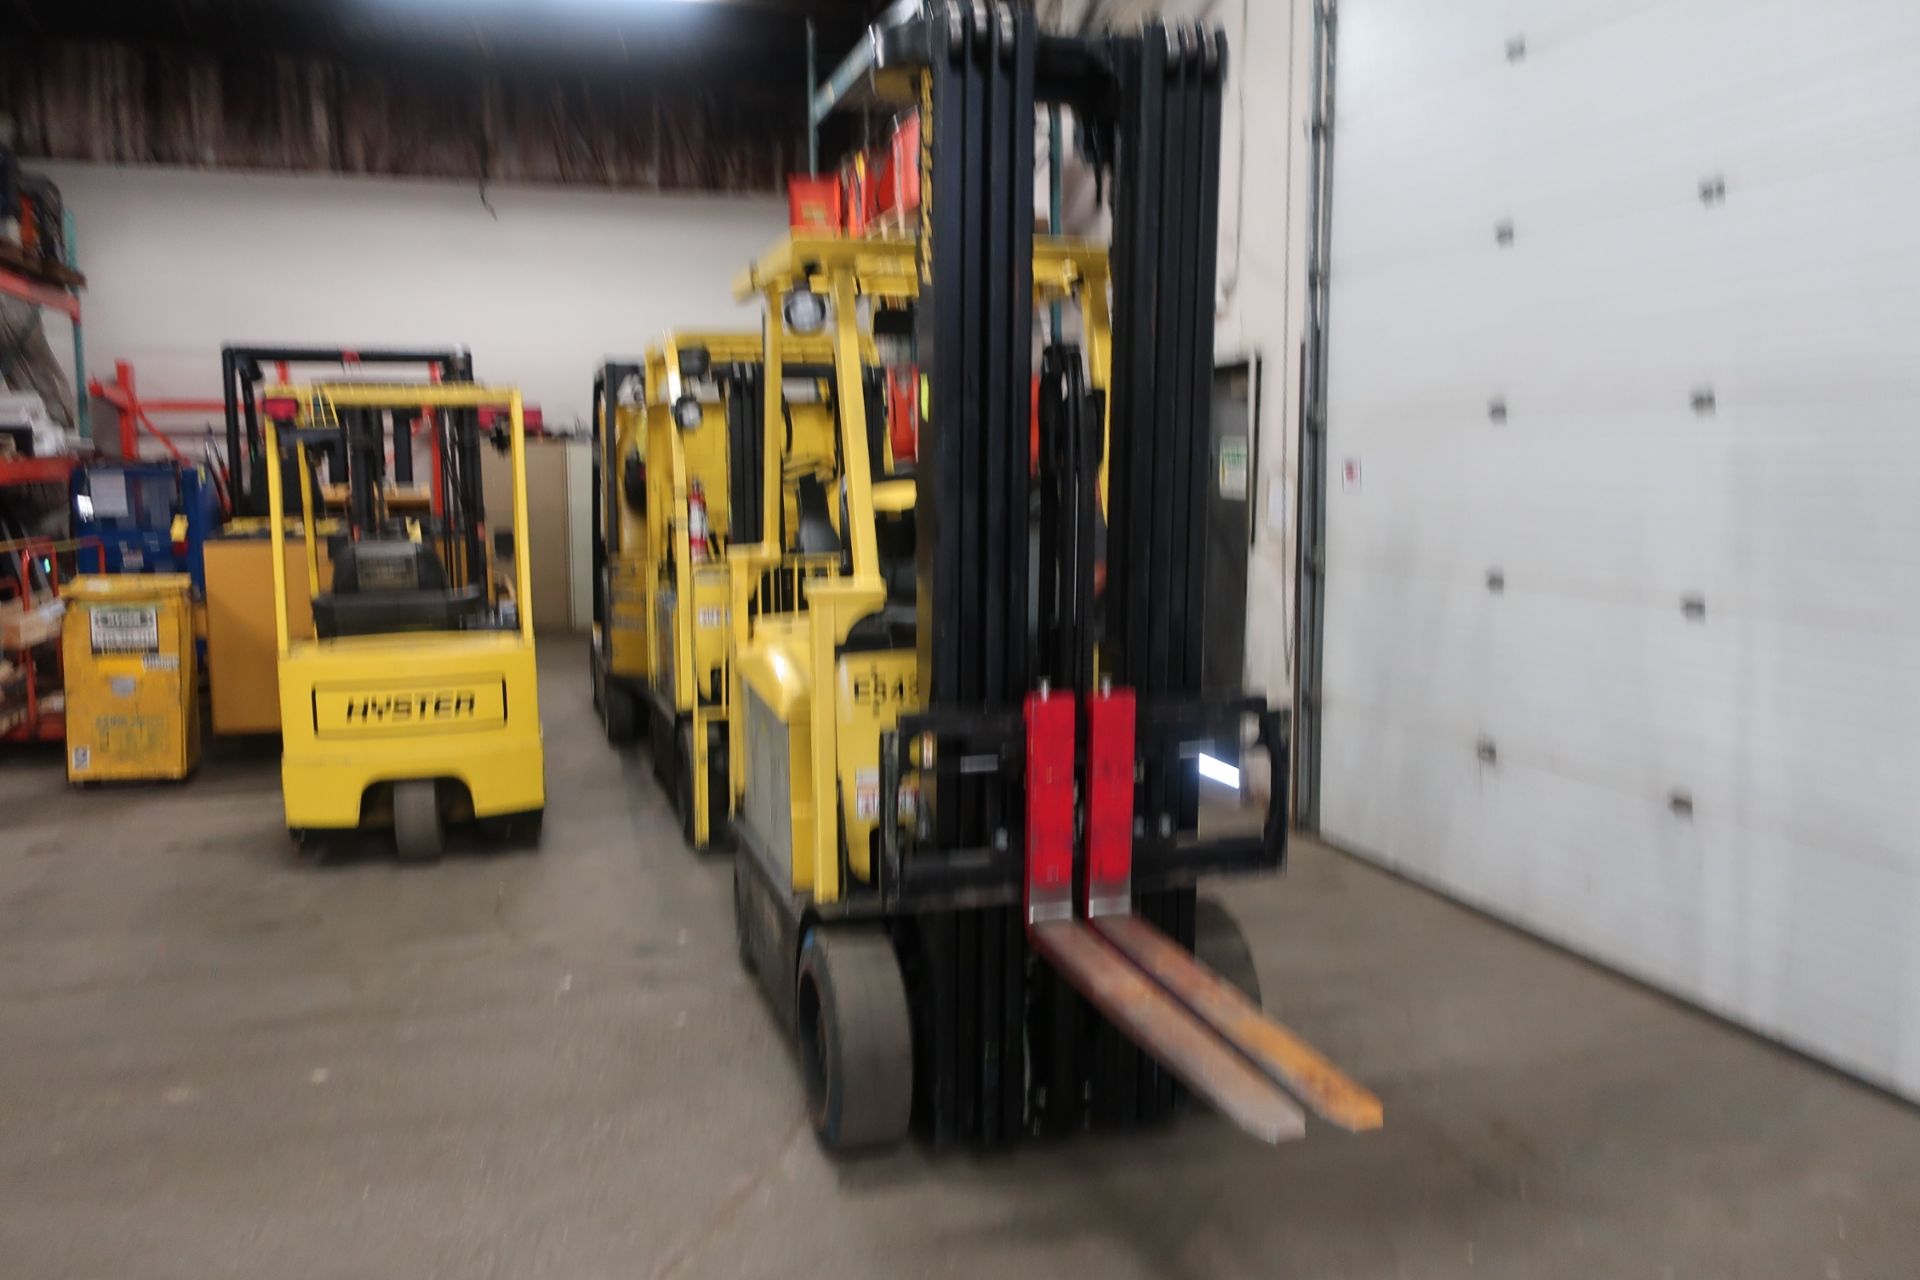 FREE CUSTOMS - 2014 Hyster 5000lbs Capacity Forklift with 4-STAGE mast - electric with charger - Image 2 of 2